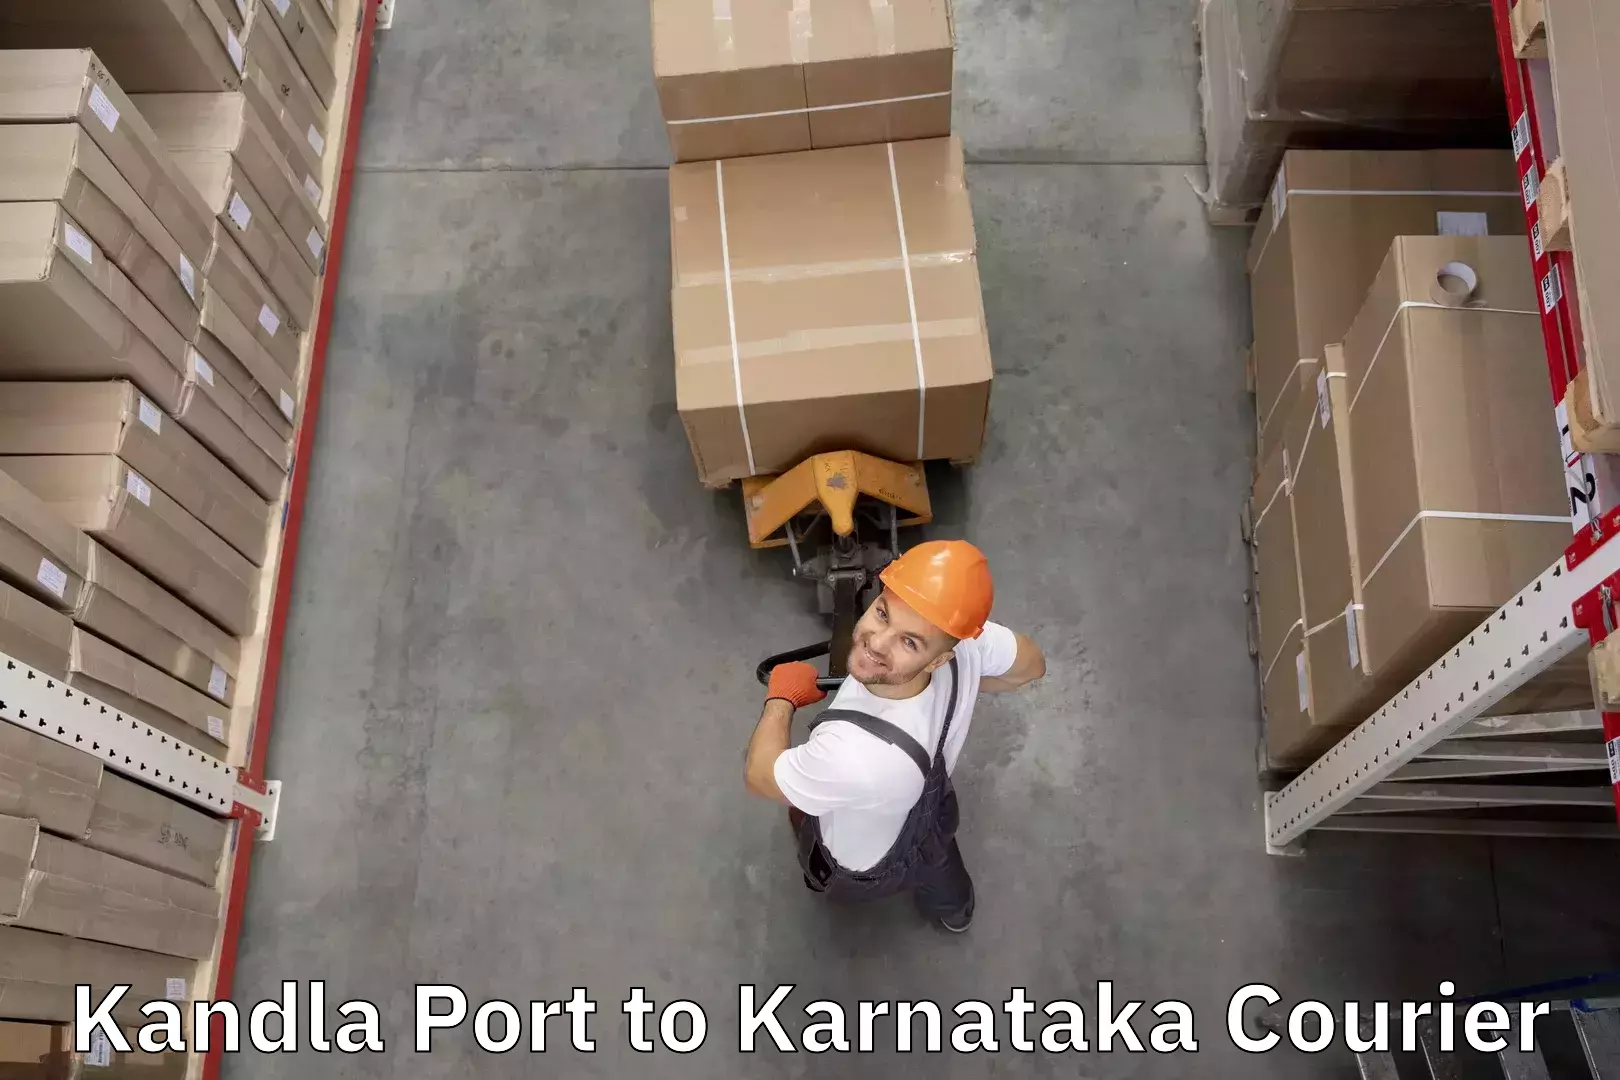 Baggage delivery technology Kandla Port to Manipal Academy of Higher Education